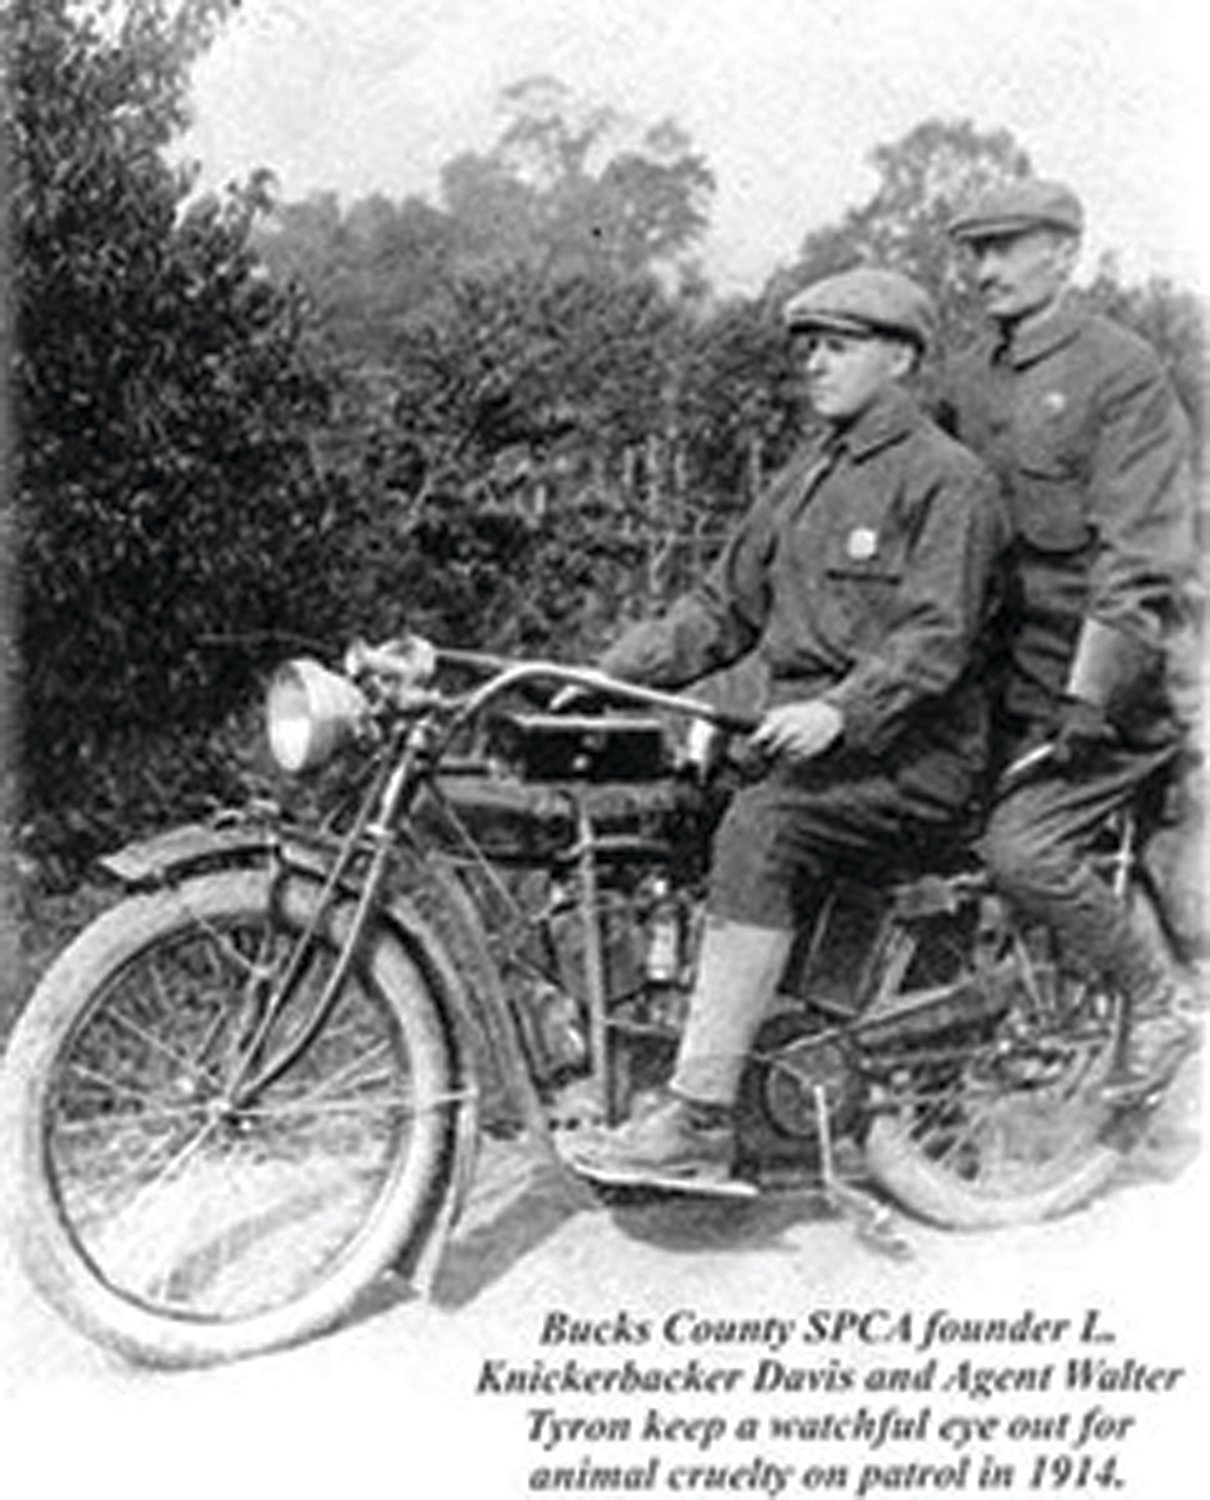 In the early years of the Bucks County SPCA, founder Knickerbacker Davis and Agent Walter Tryon crisscrossed the county by motorcycle responding to emergencies.